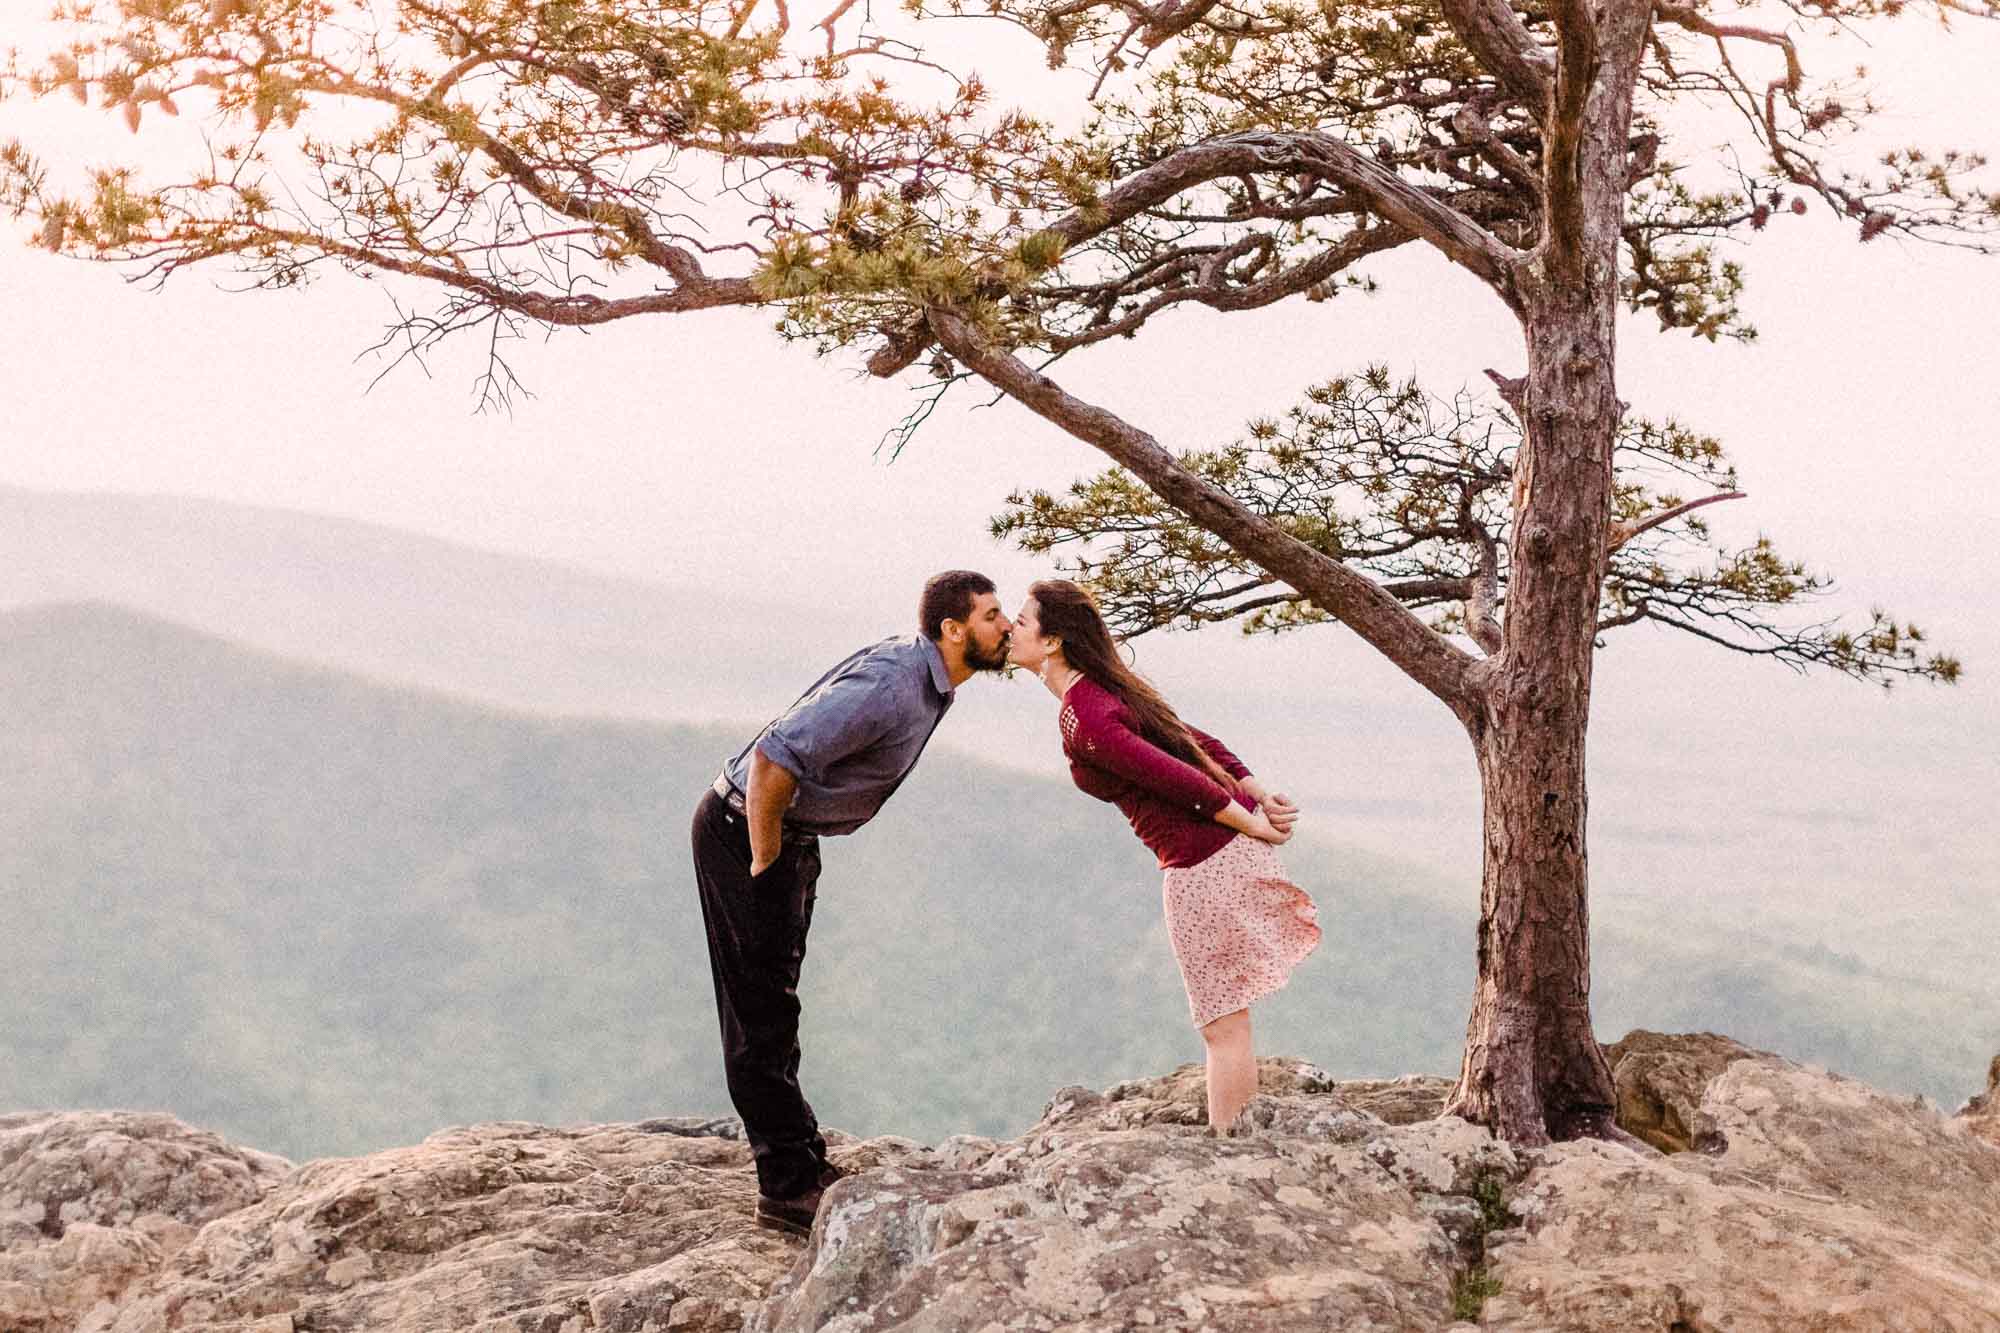 charlottesville-engagement-session-ravens-roost-overlook-outdoor-engagement-session-virginia-blue-ridge-silly-kissing.jpg